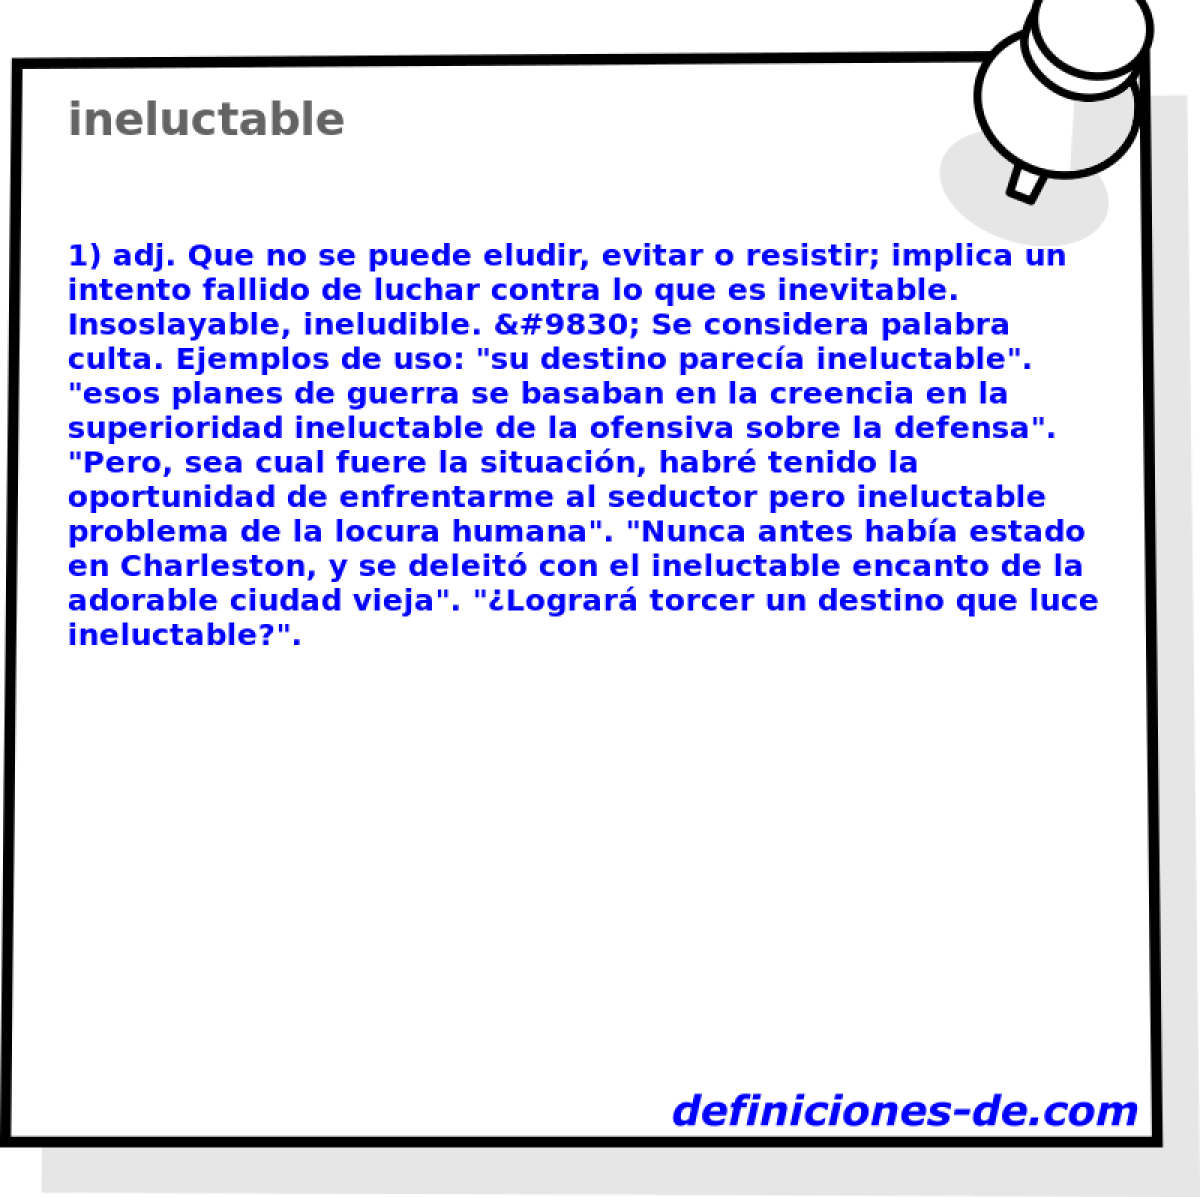 ineluctable 